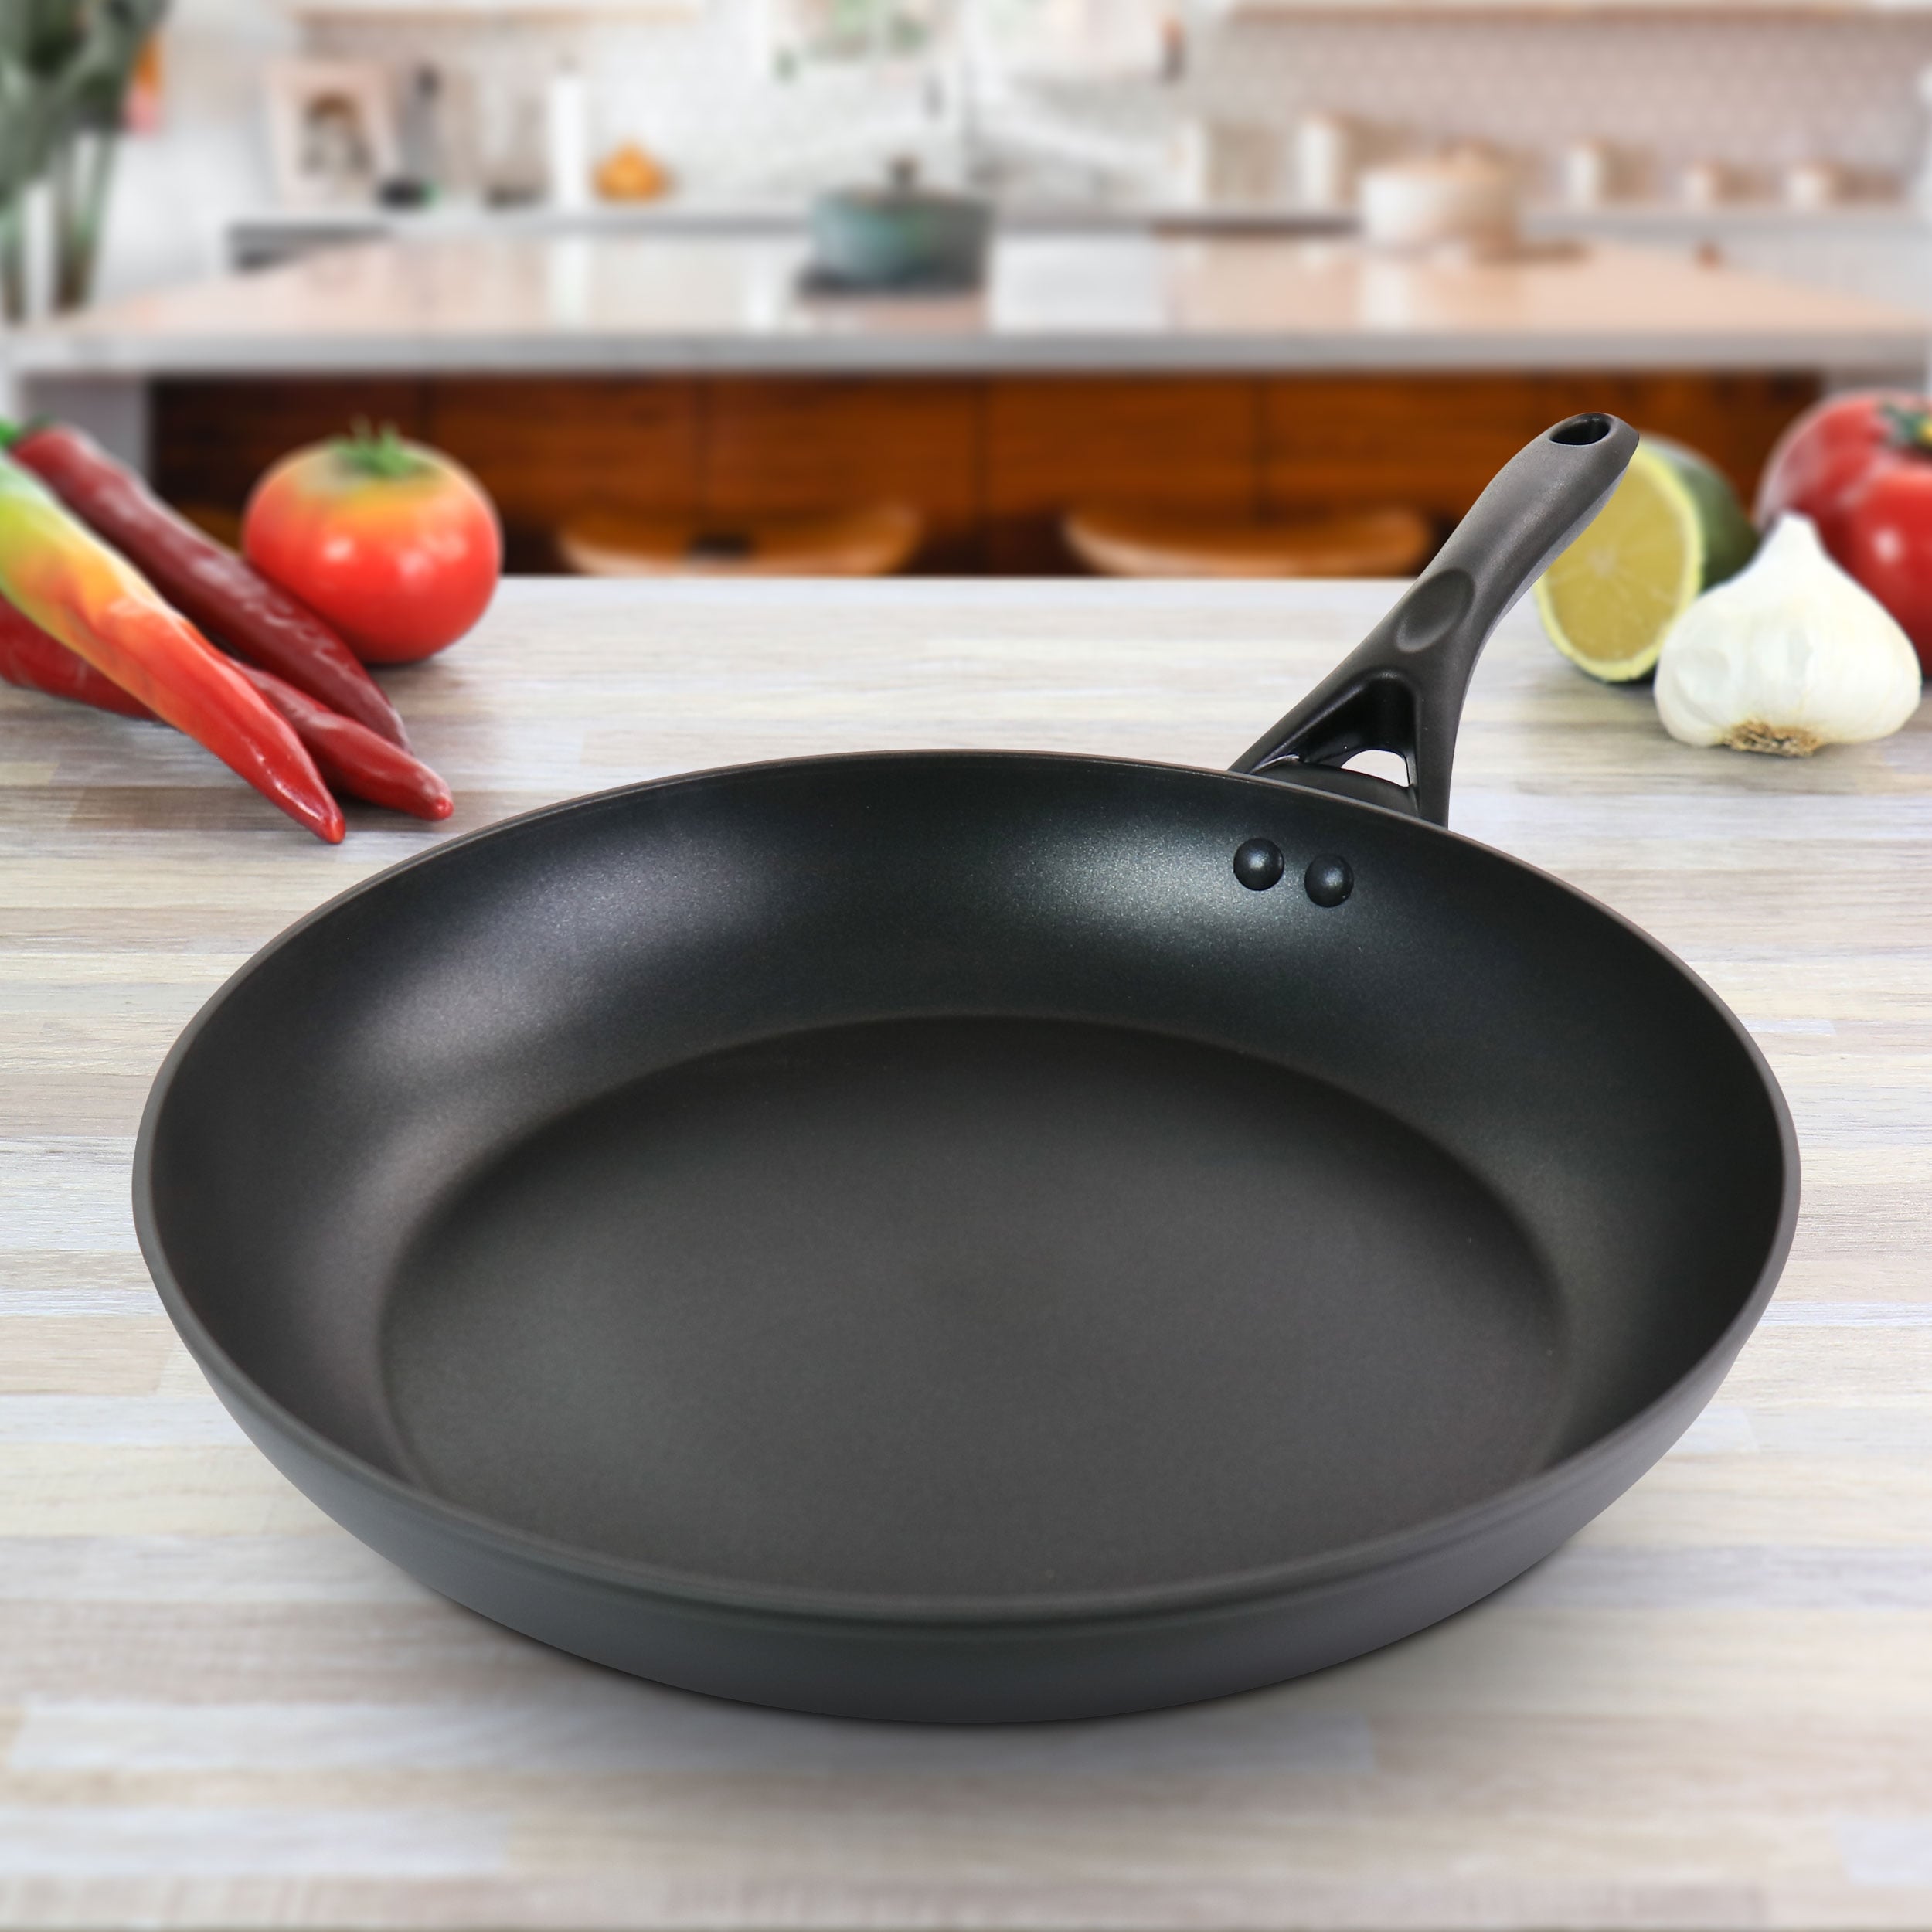 https://ak1.ostkcdn.com/images/products/is/images/direct/9d7c9940eb86cb1a396490fcf9c52b07bcc7d87e/Oster-12-Inch-Aluminum-Frying-Pan.jpg